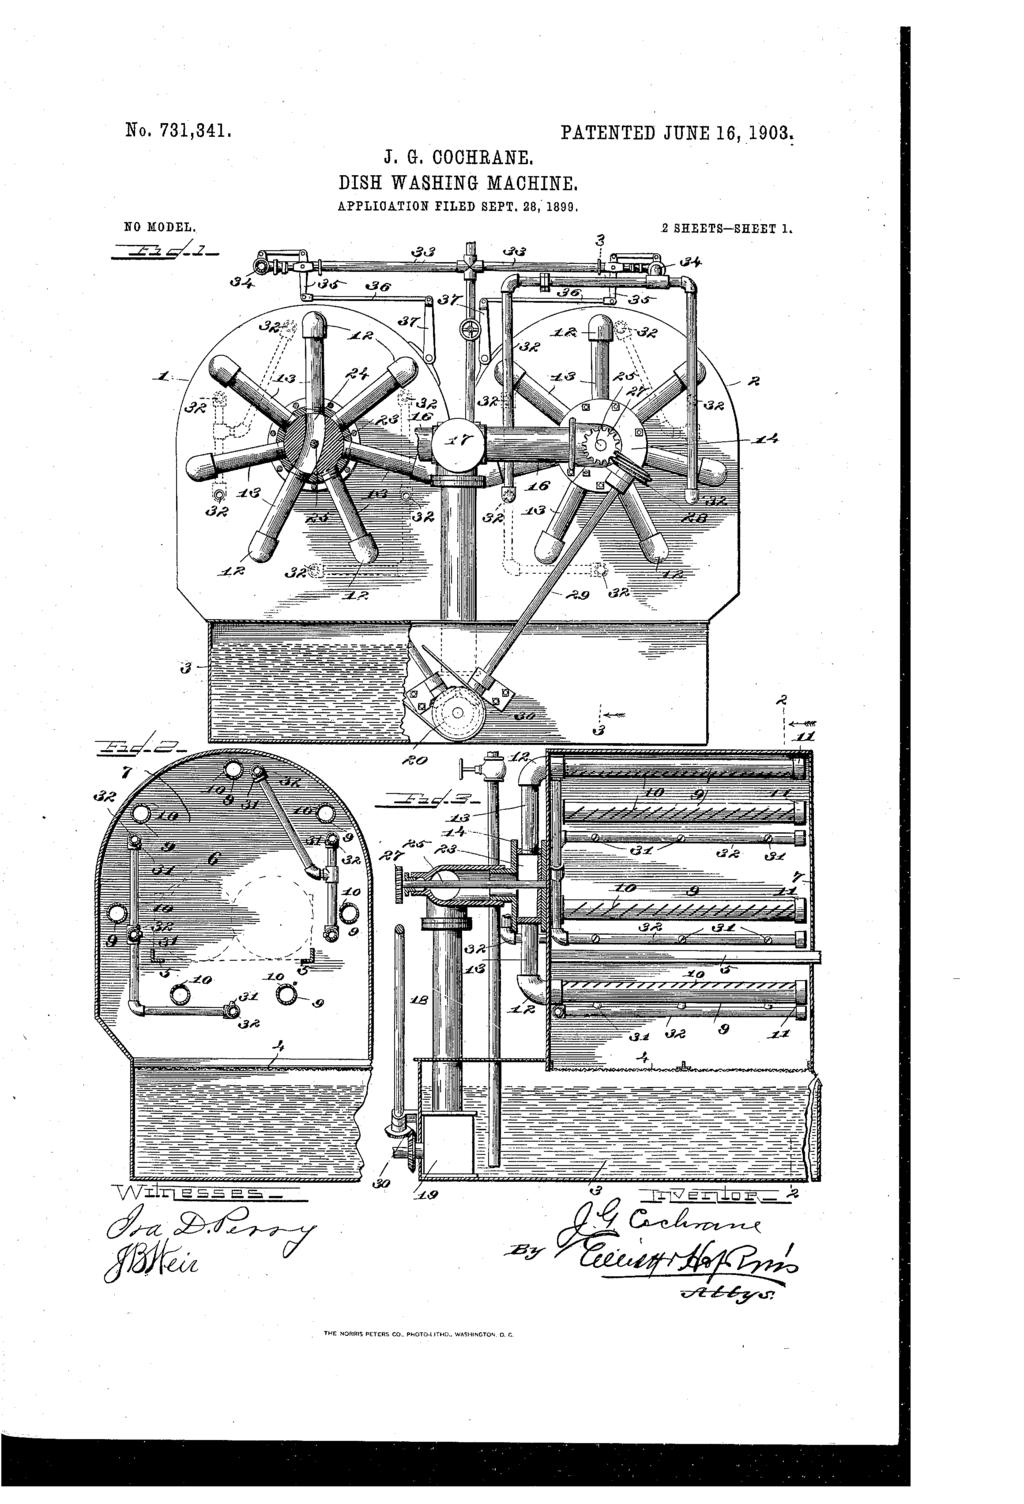 No. 731,341, PATENTED JUNE 16, 1903. J. G.